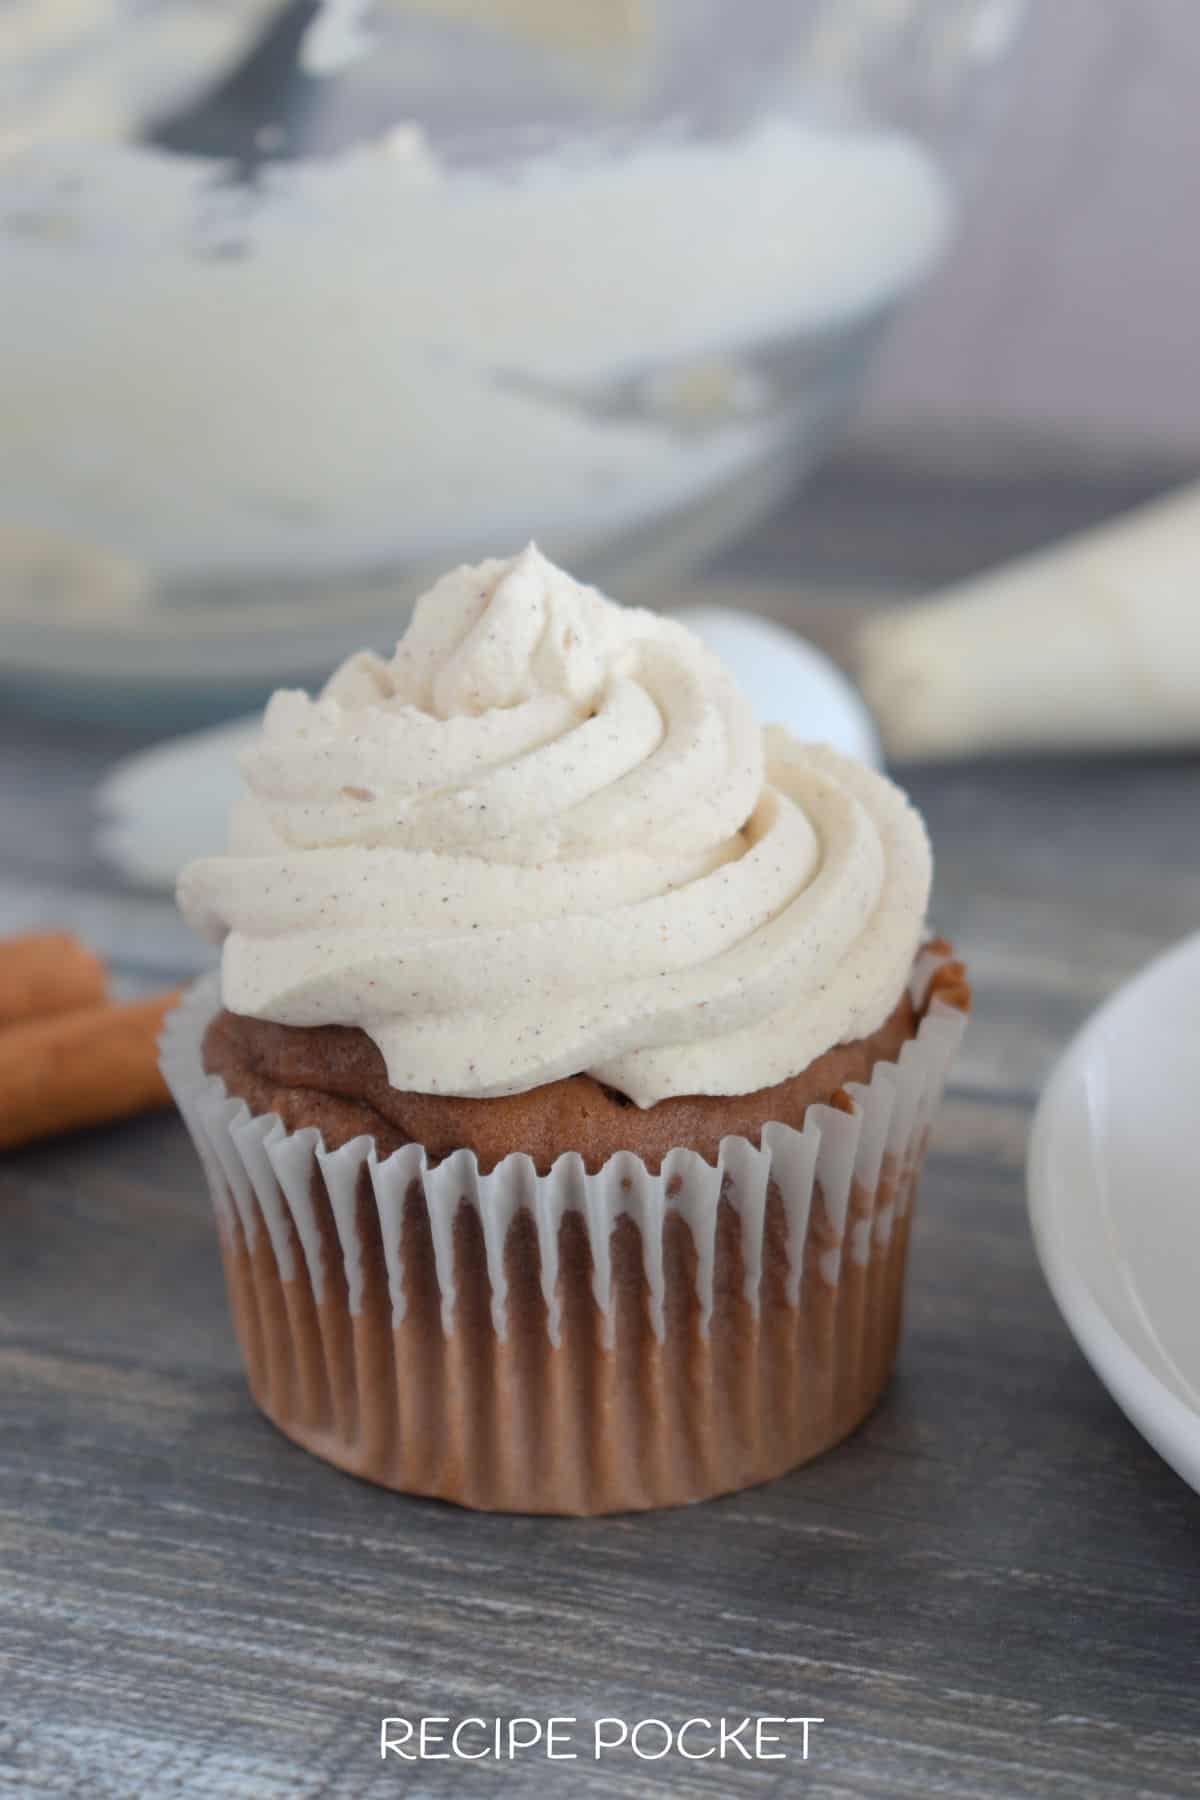 A cupcake with cream frosting.